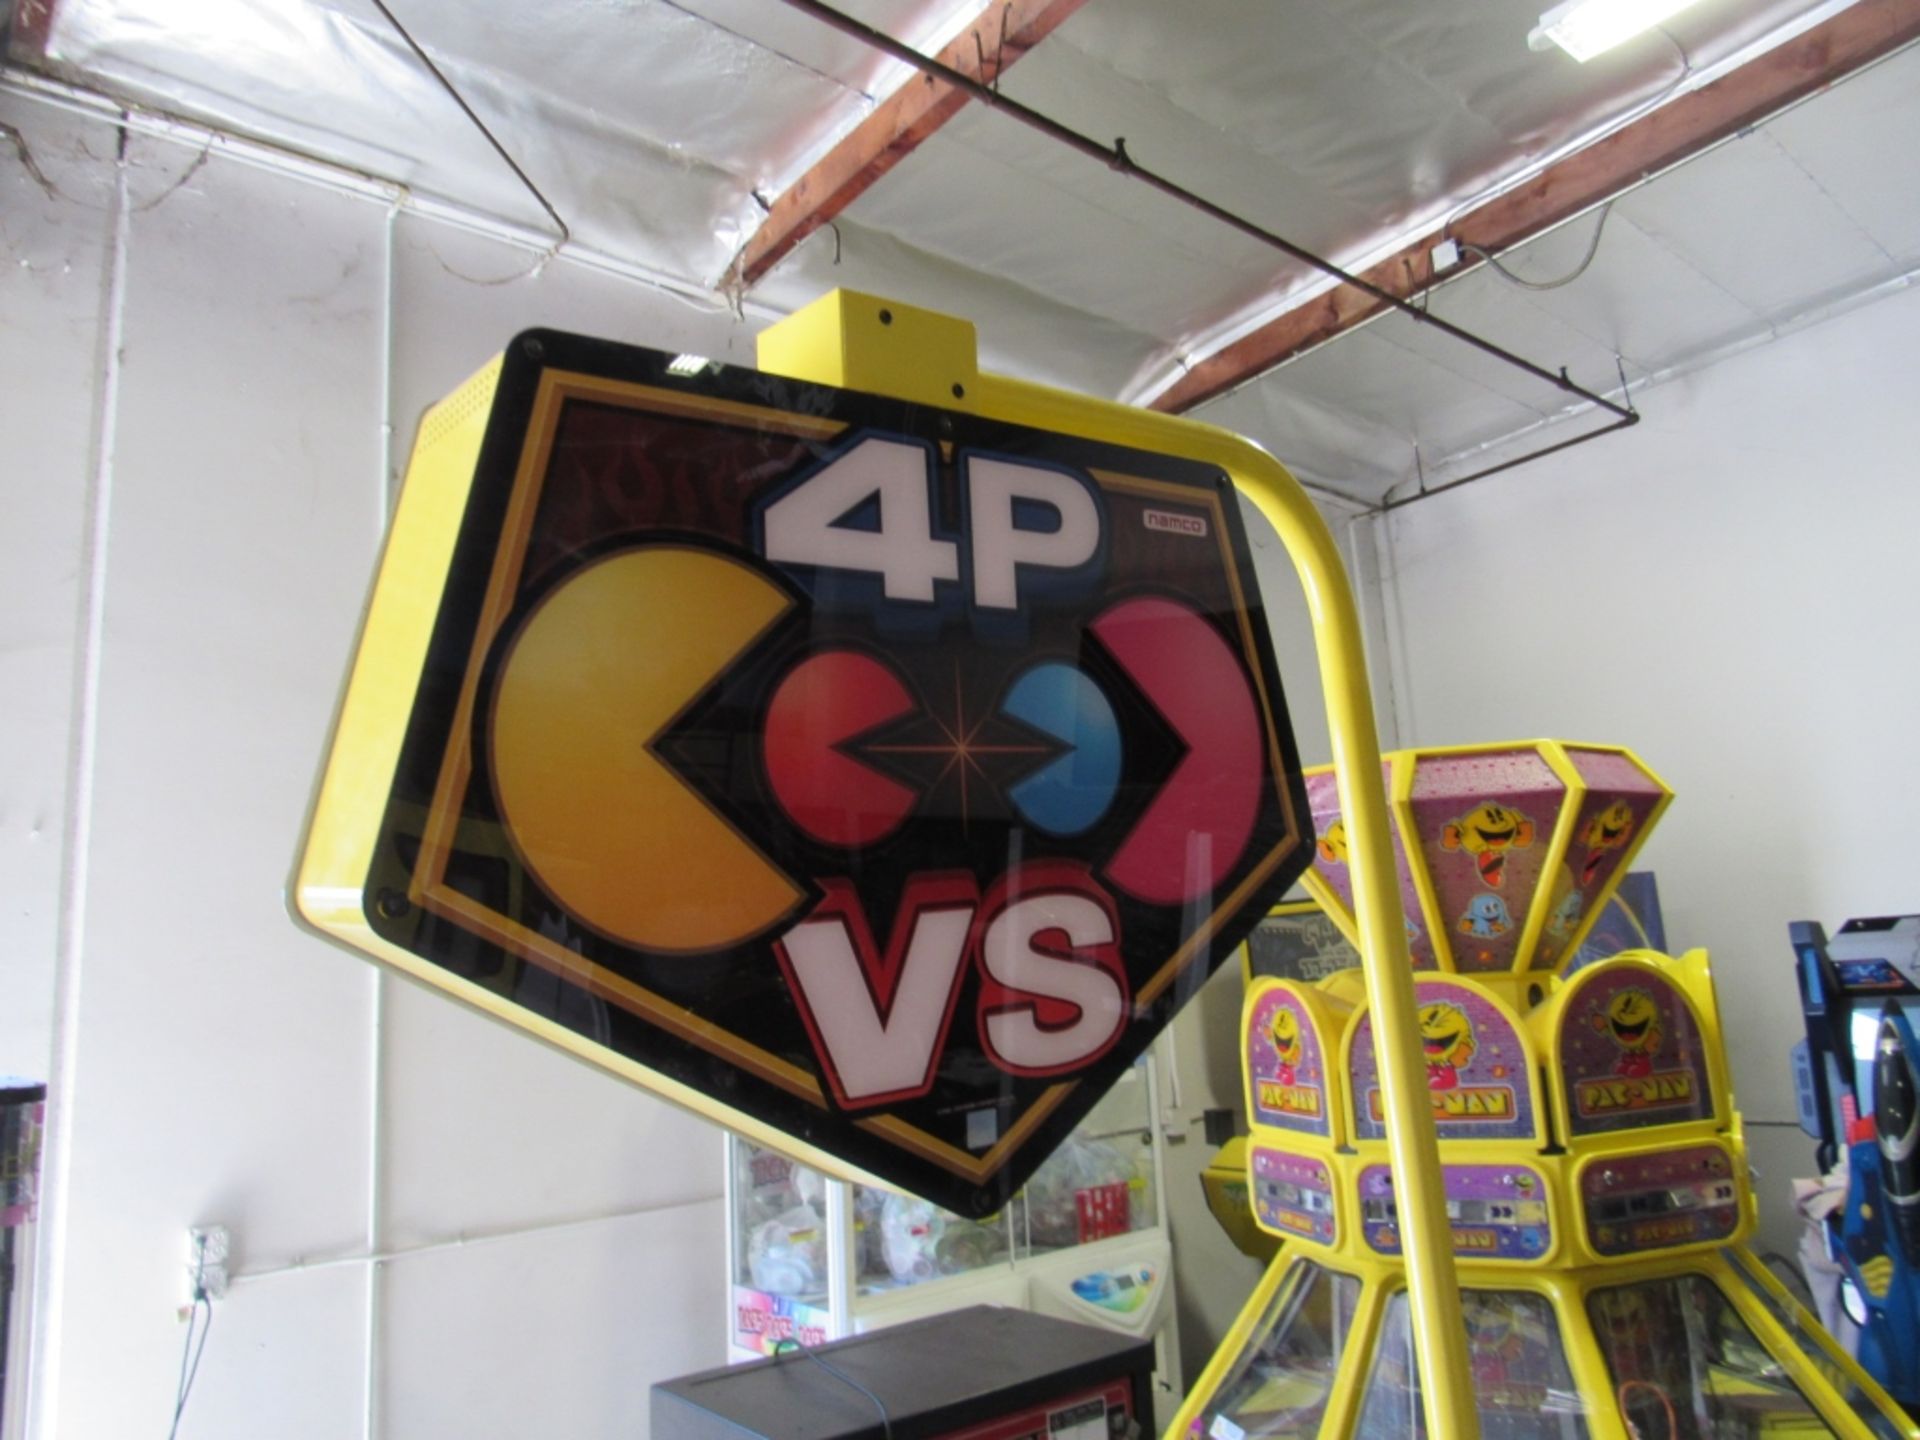 PACMAN BATTLE ROYALE 4 PLAYER TABLE ARCADE GAME - Image 9 of 11